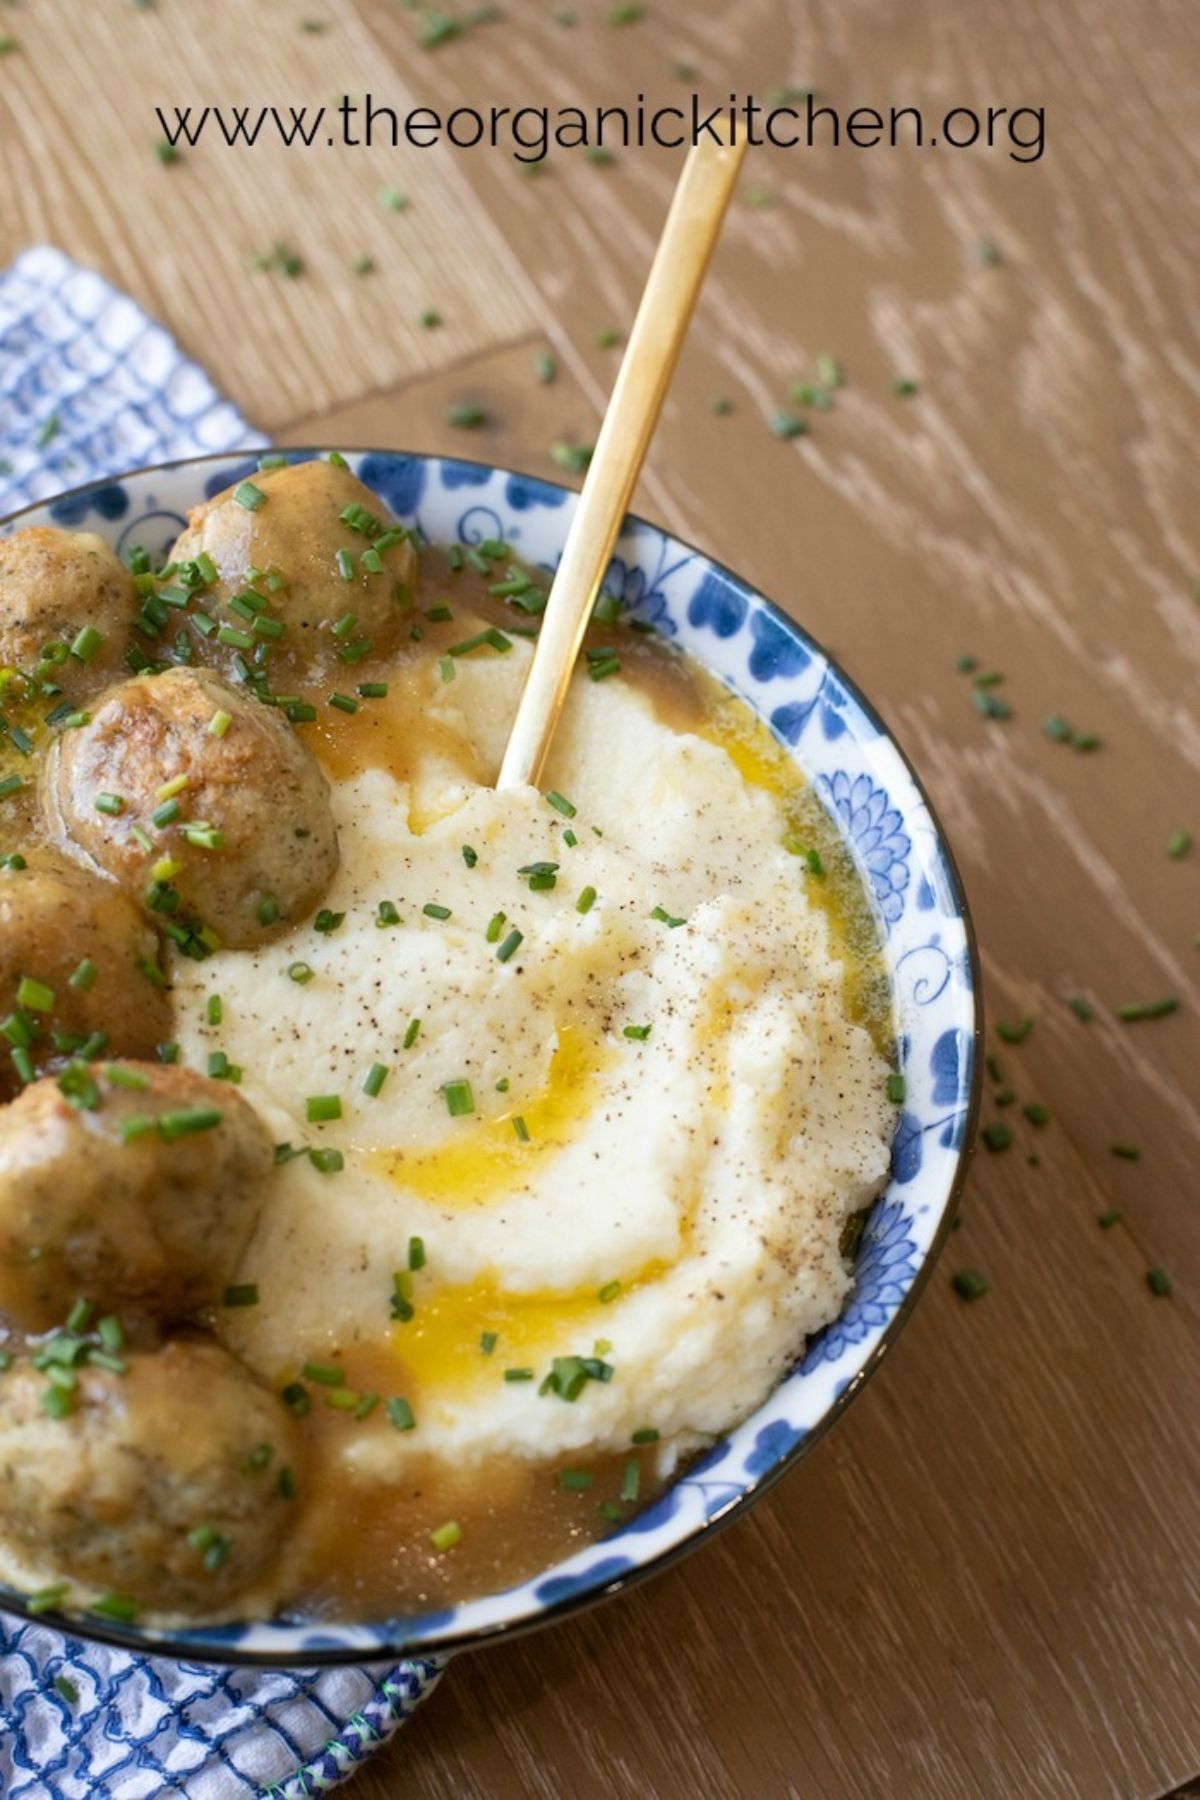 A blue and white patterned bowl of meatballs in gravy with cauliflower mash